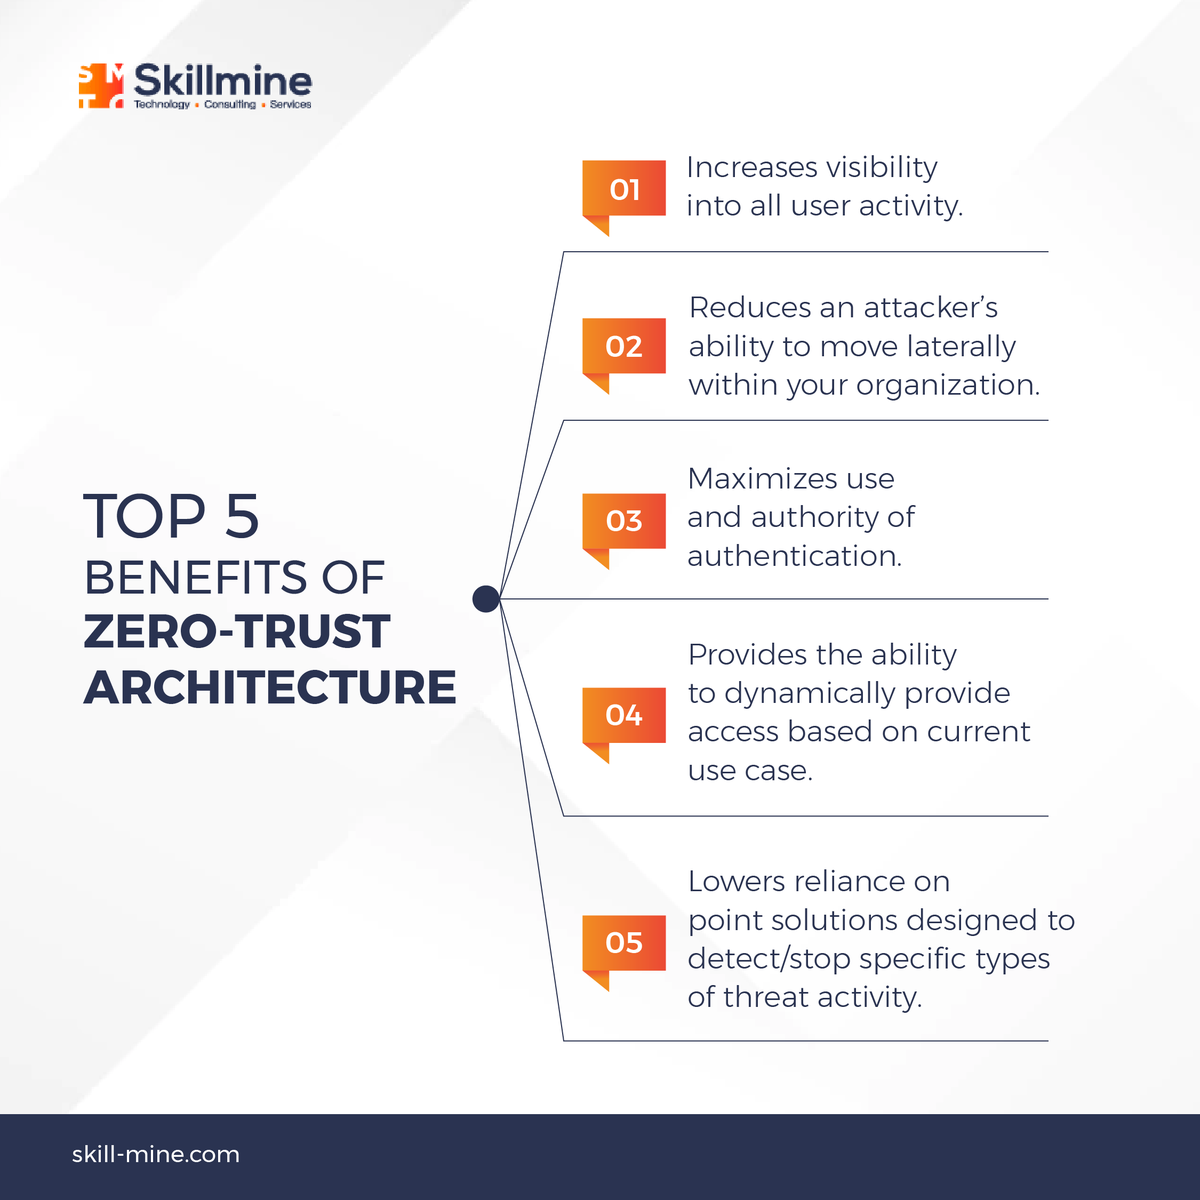 Skillmine’s #cybersecurityservices can provide your business with a robust, flawless, & secure infrastructure.

Follow @Skillminetech 

#zerotrustsecurity #zerotrustarchitecture  #cybersecuritystrategy #cyberthreat #cybersecurityservices #cybersecurityexpert #Skillmine